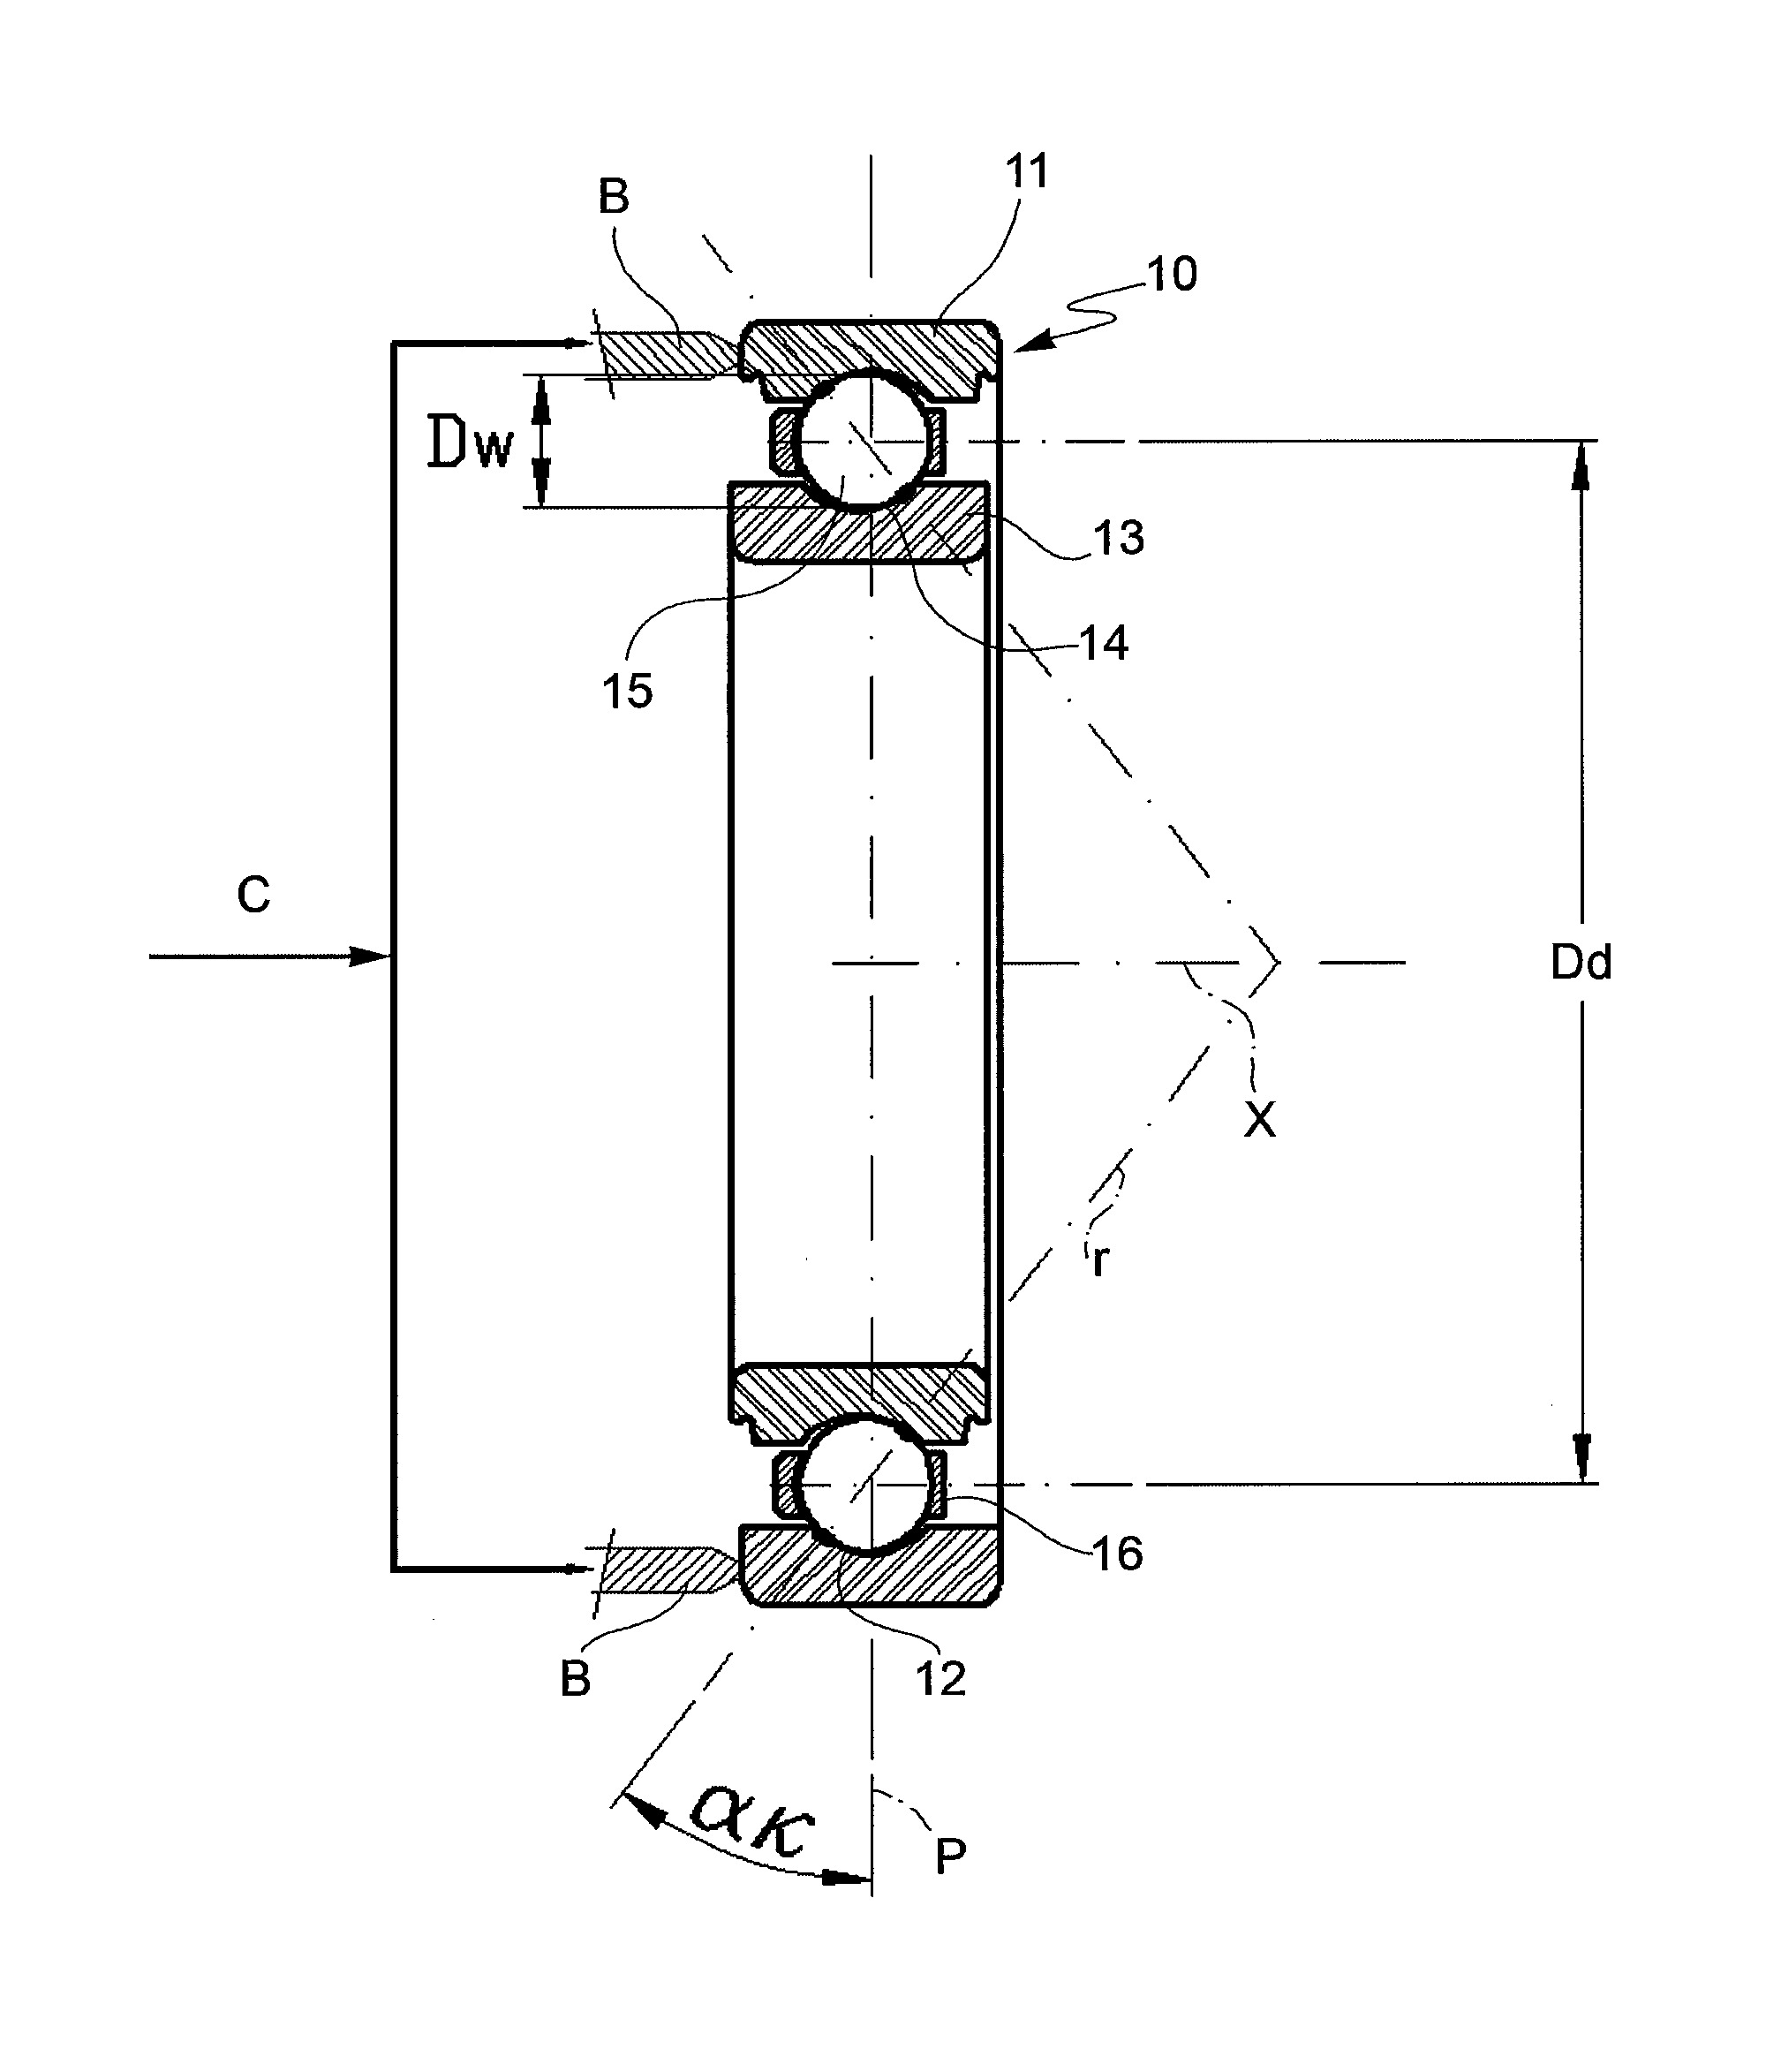 Method of Determining the Contact Angle of a Ball Bearing